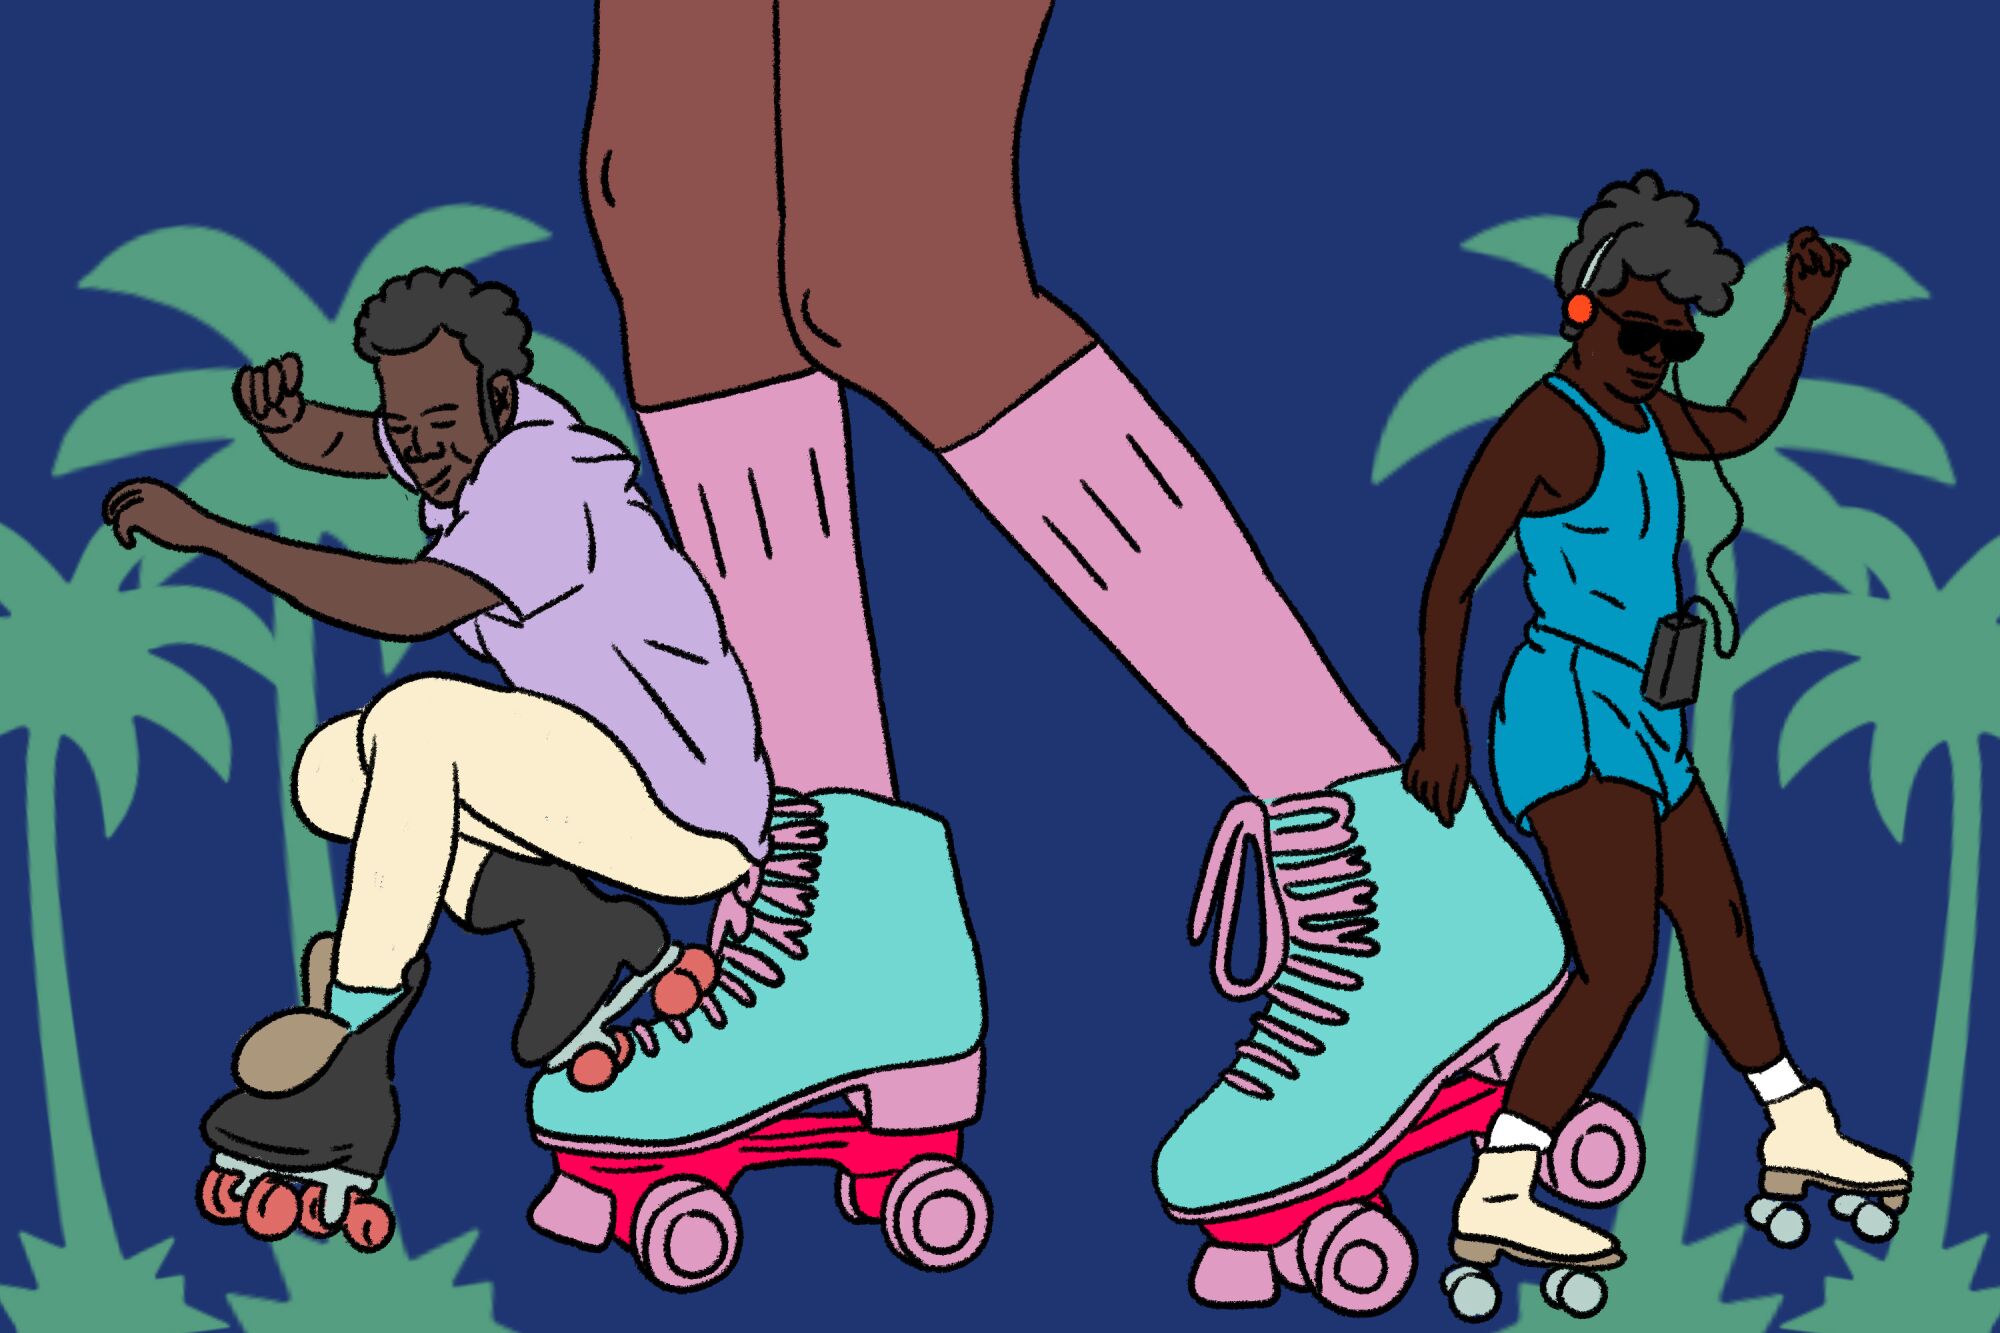 An illustration of people roller skating, a pastime that exploded during the pandemic but is rooted in L.A. Black culture.